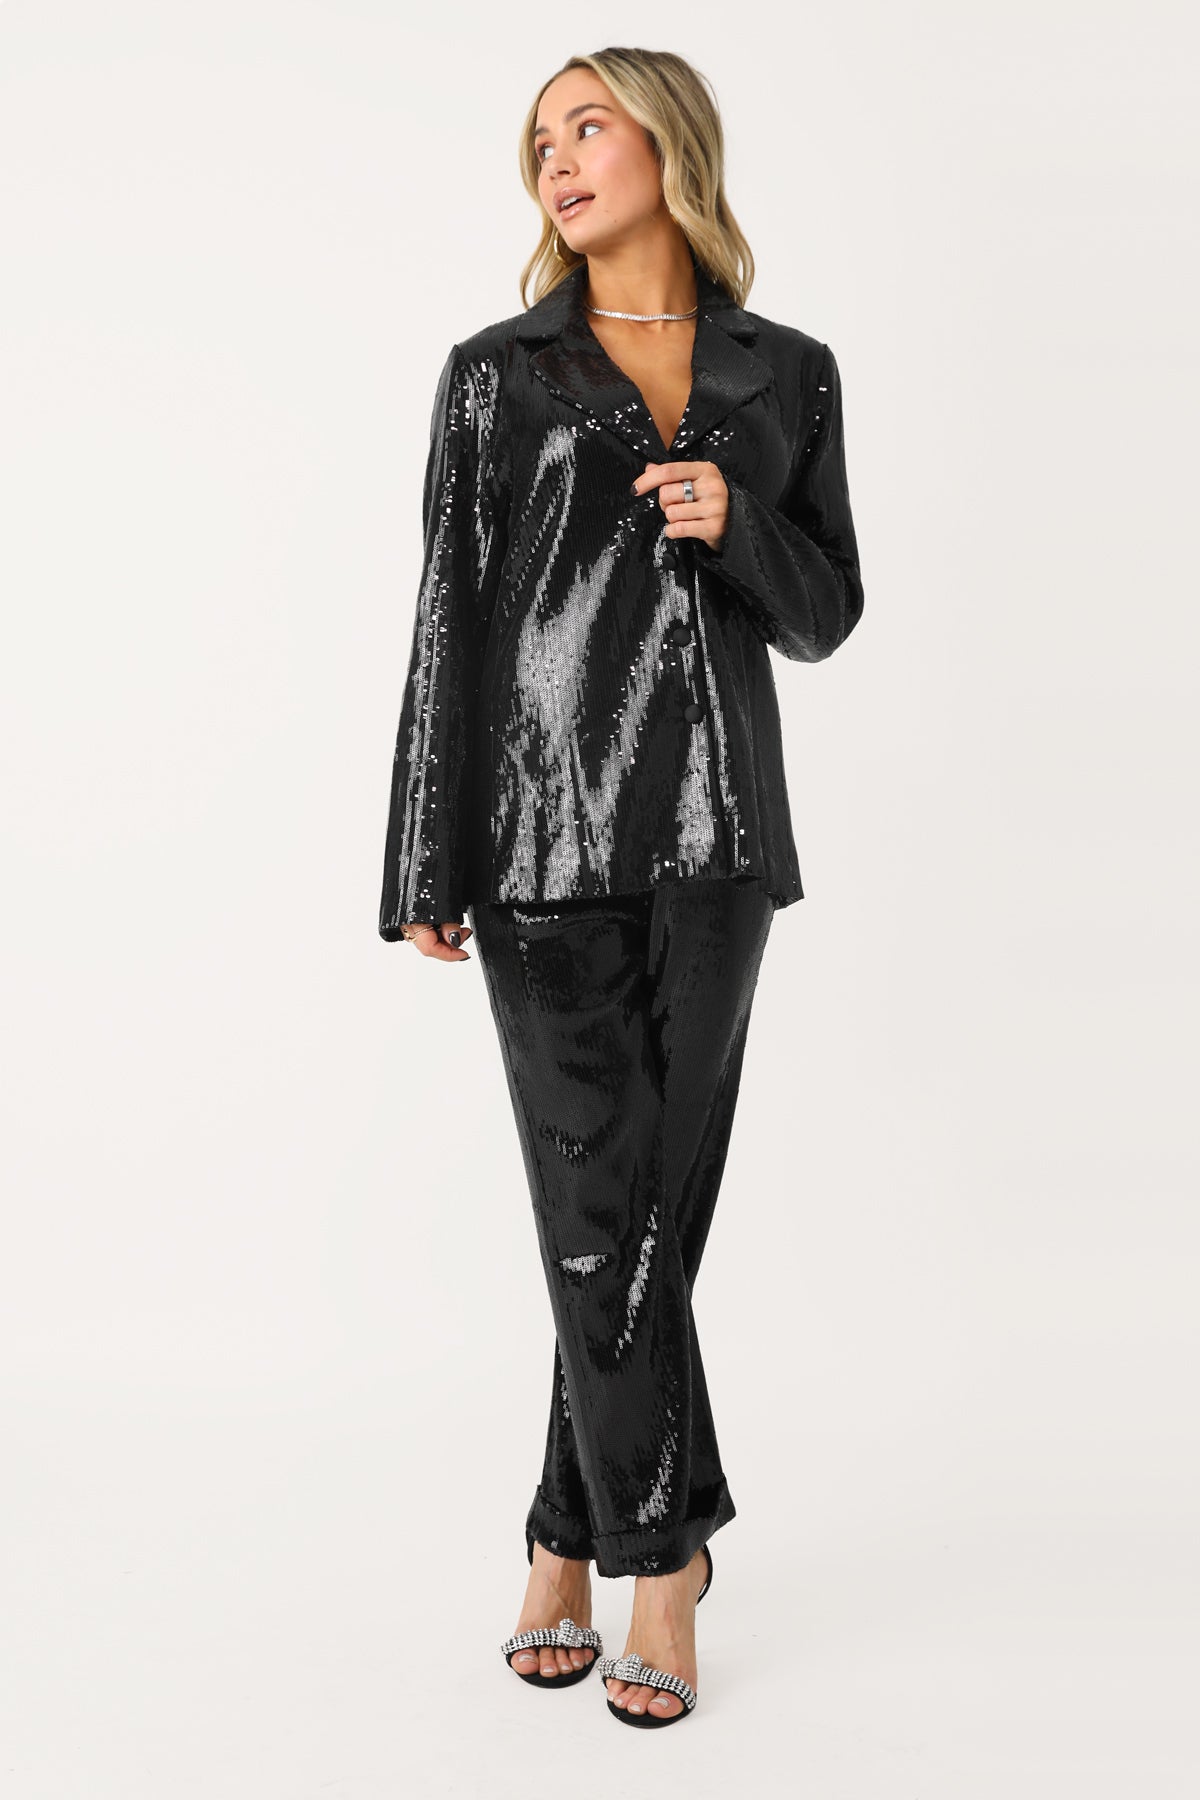 TIME TO DANCE BLACK SEQUIN CUFFED PANT